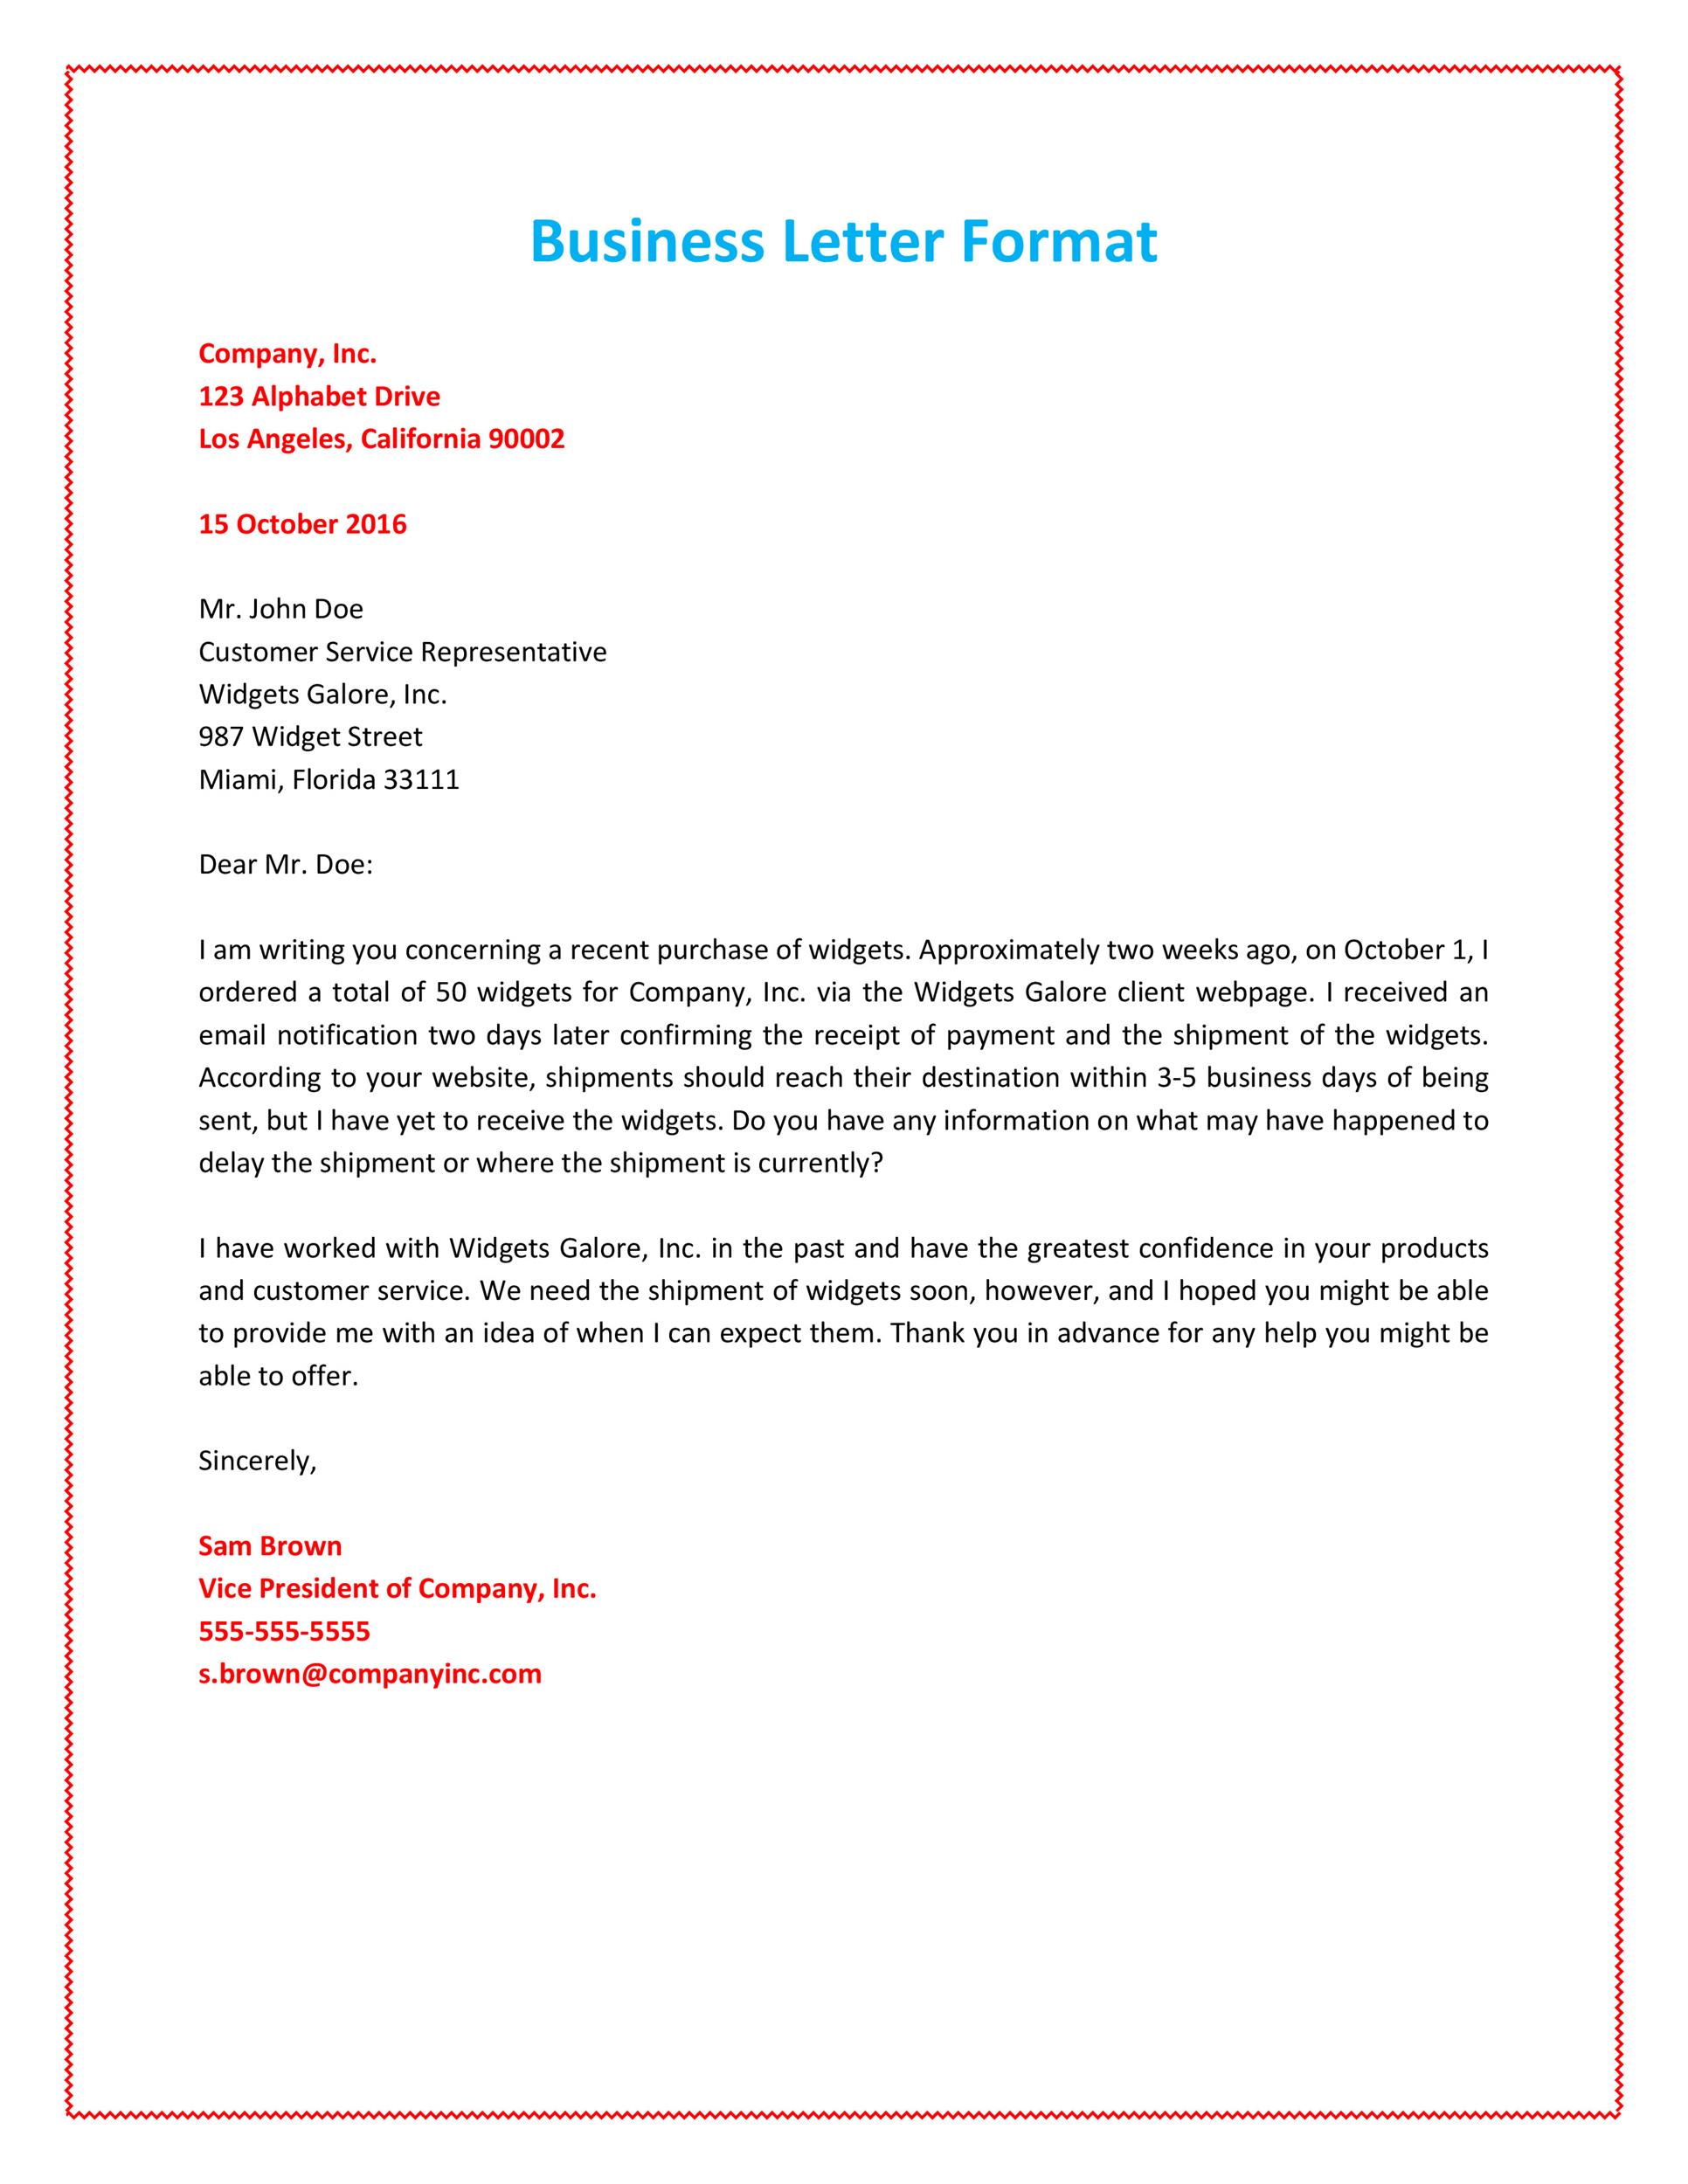 How to write business letters